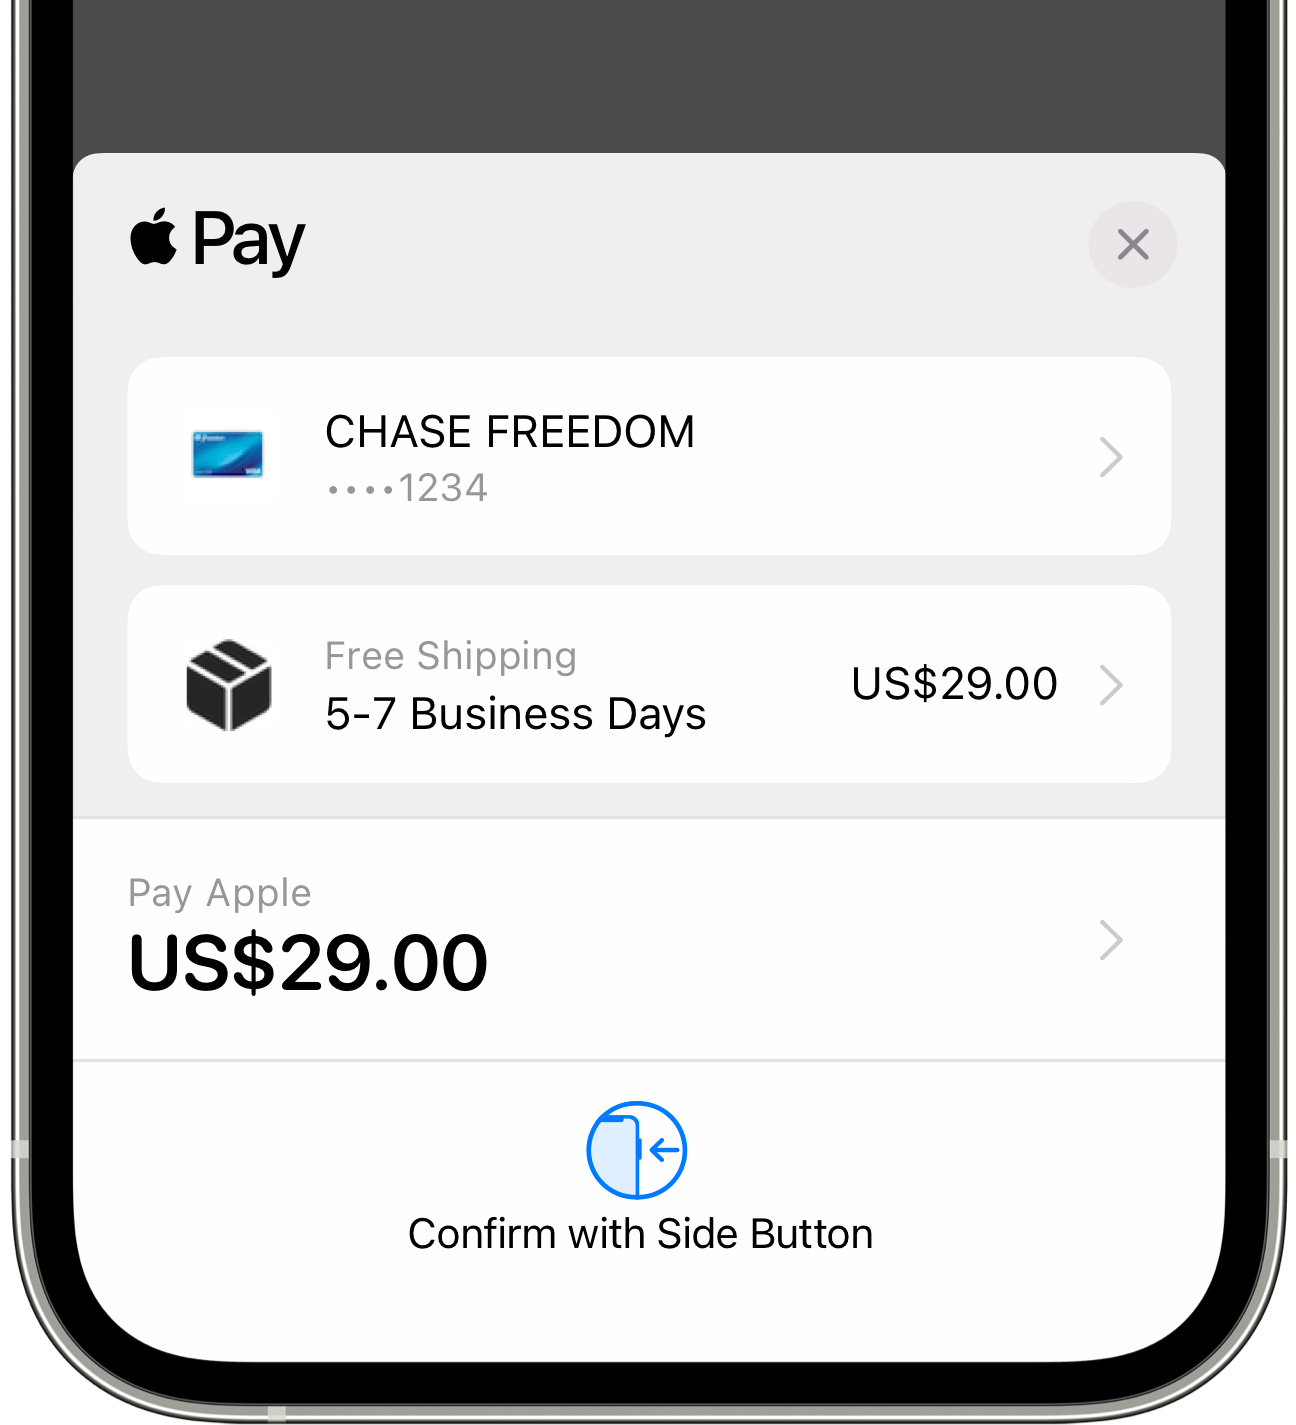 Confirm payment